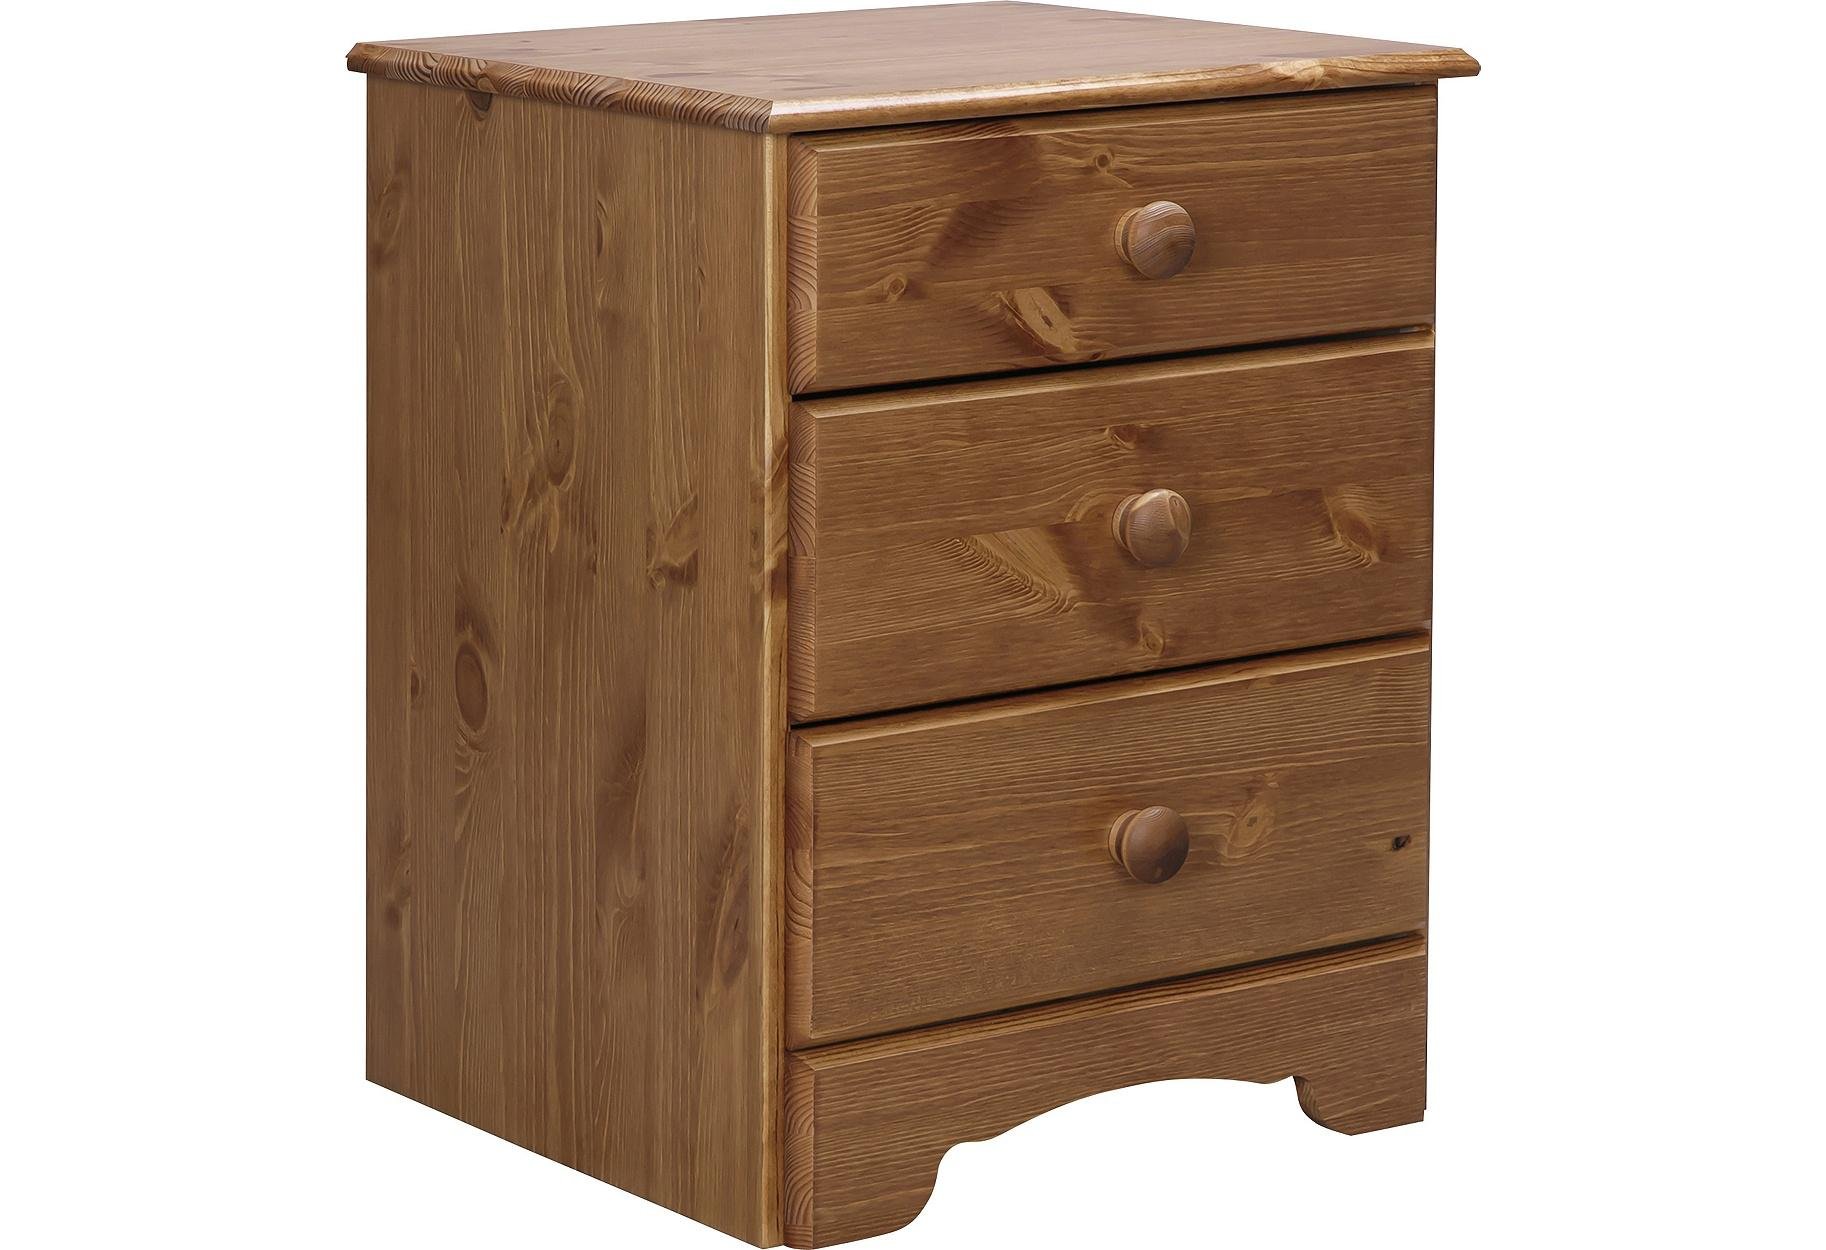 HOME Nordic 3 Drawer Bedside Chest - Pine. £24.99 at Argos | Price Drop